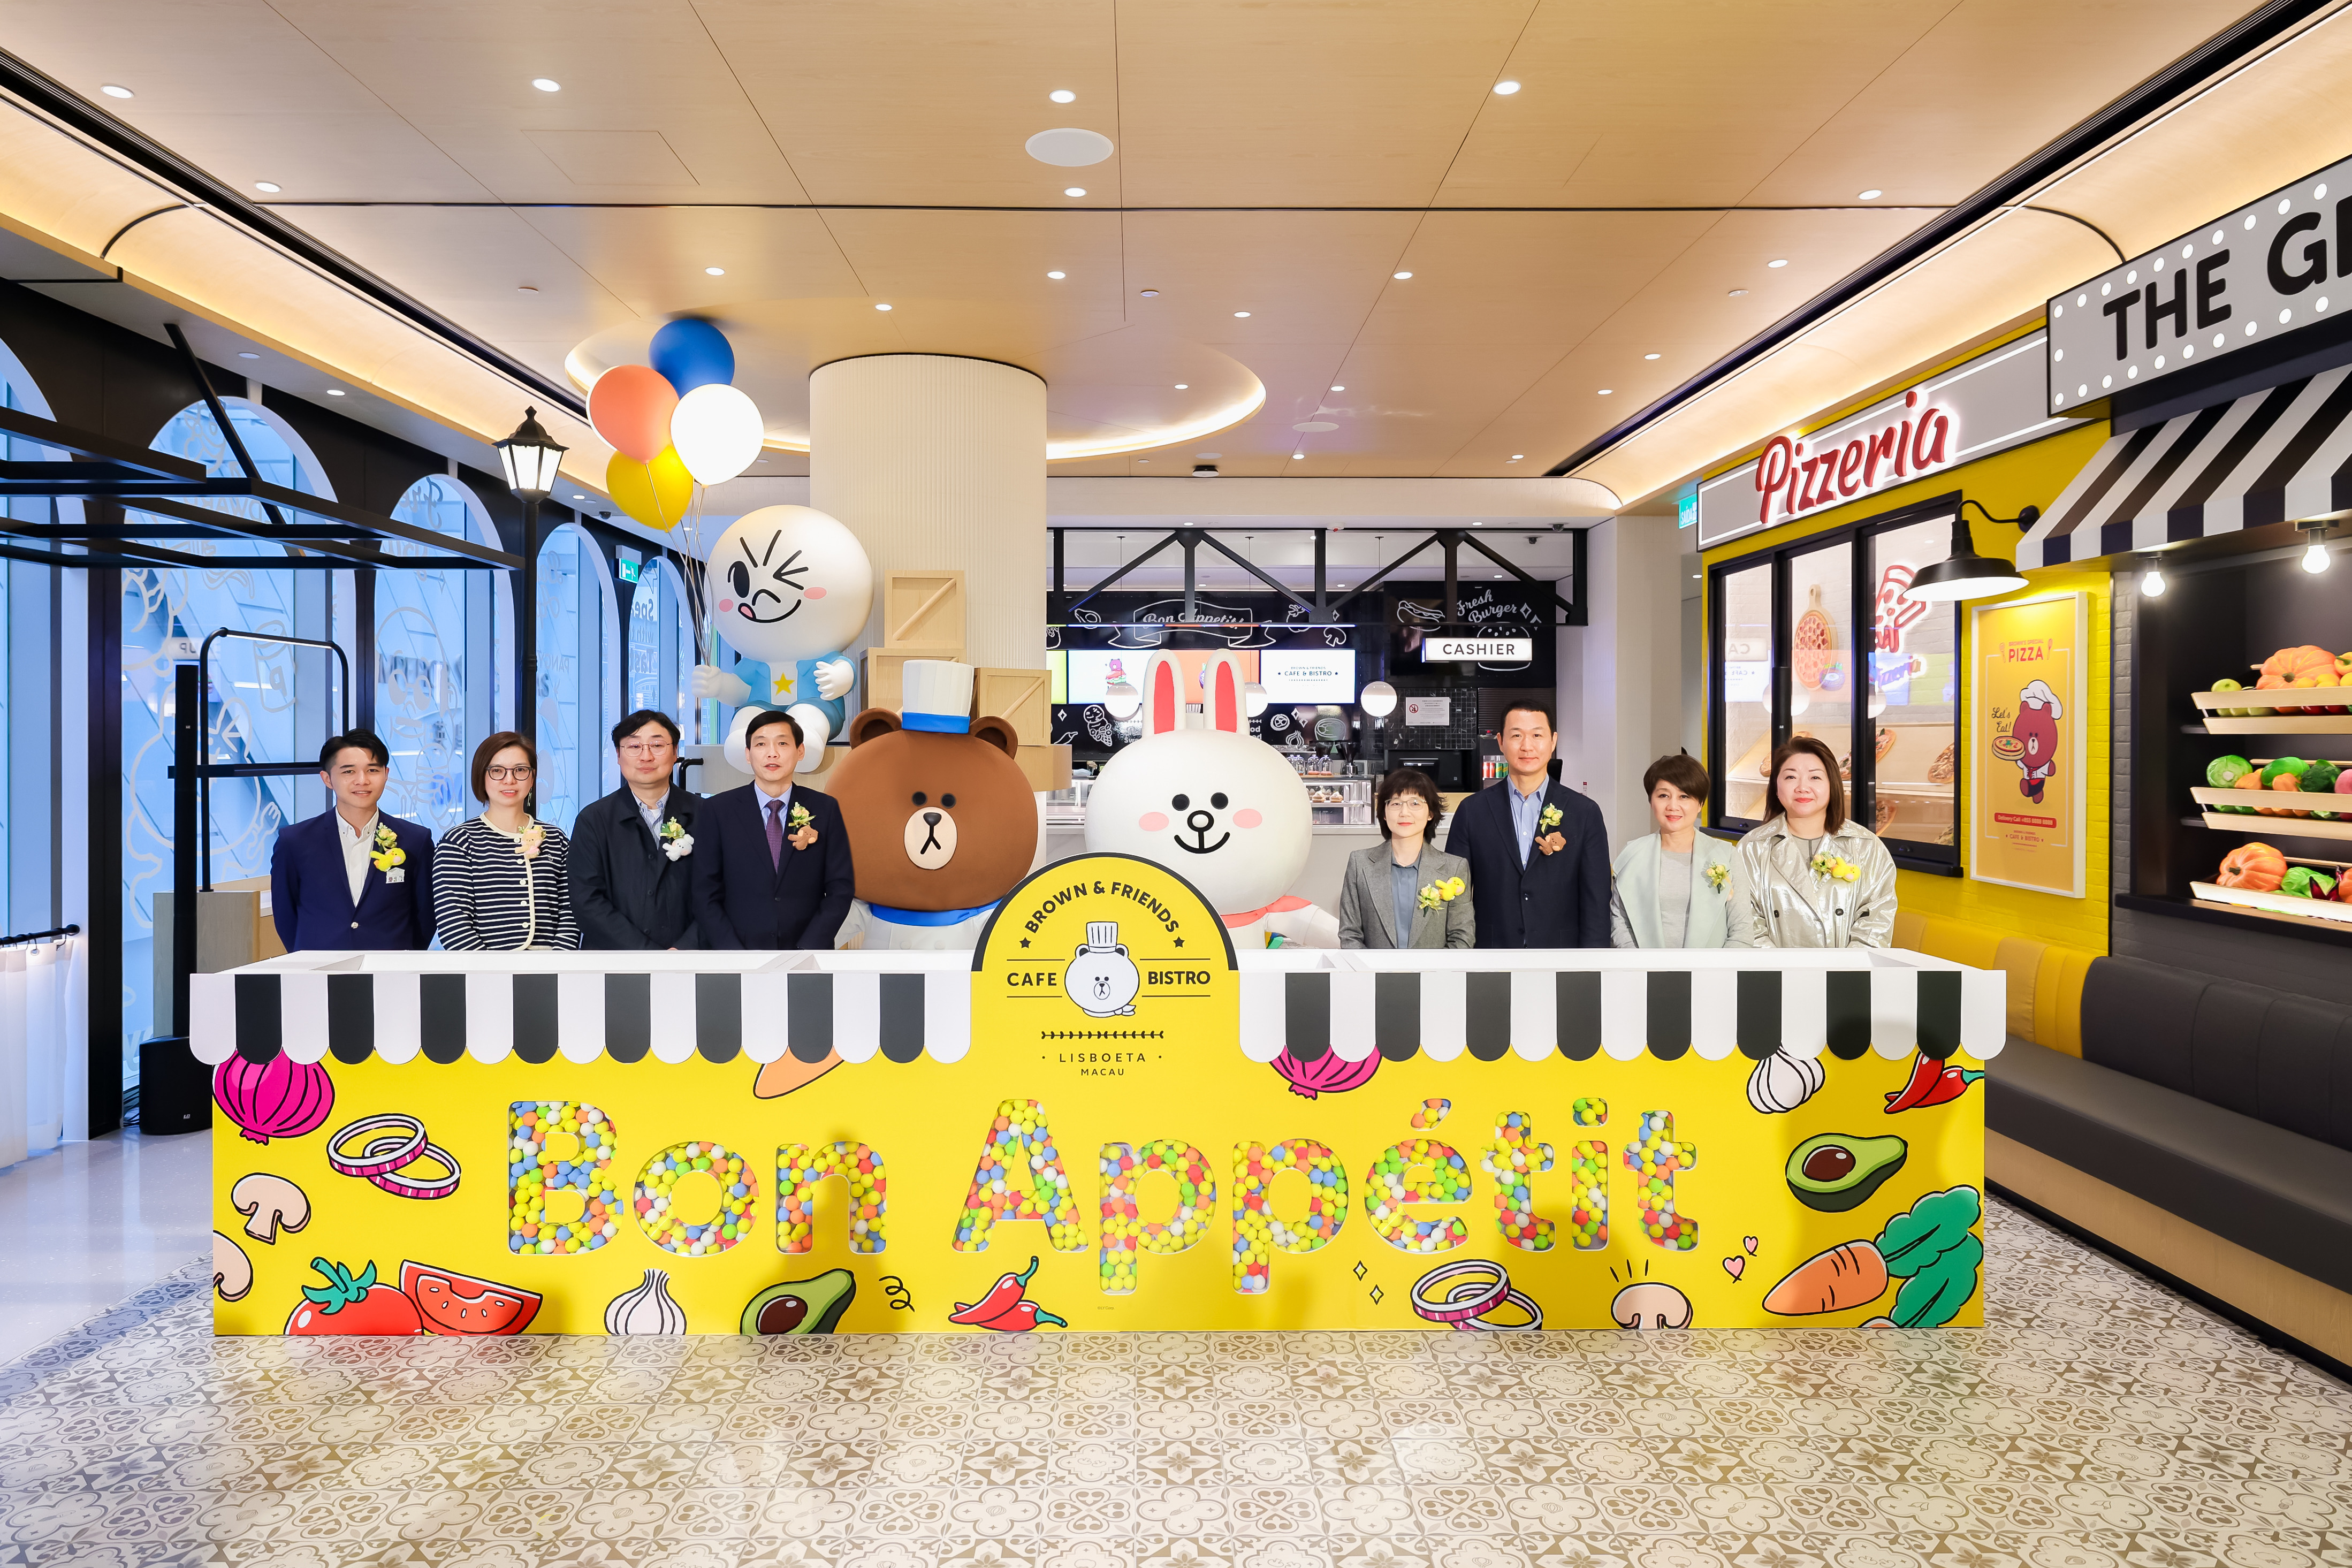 Lisboeta Macau’s world first themed restaurant “BROWN & FRIENDS CAFE & BISTRO” has officially launched